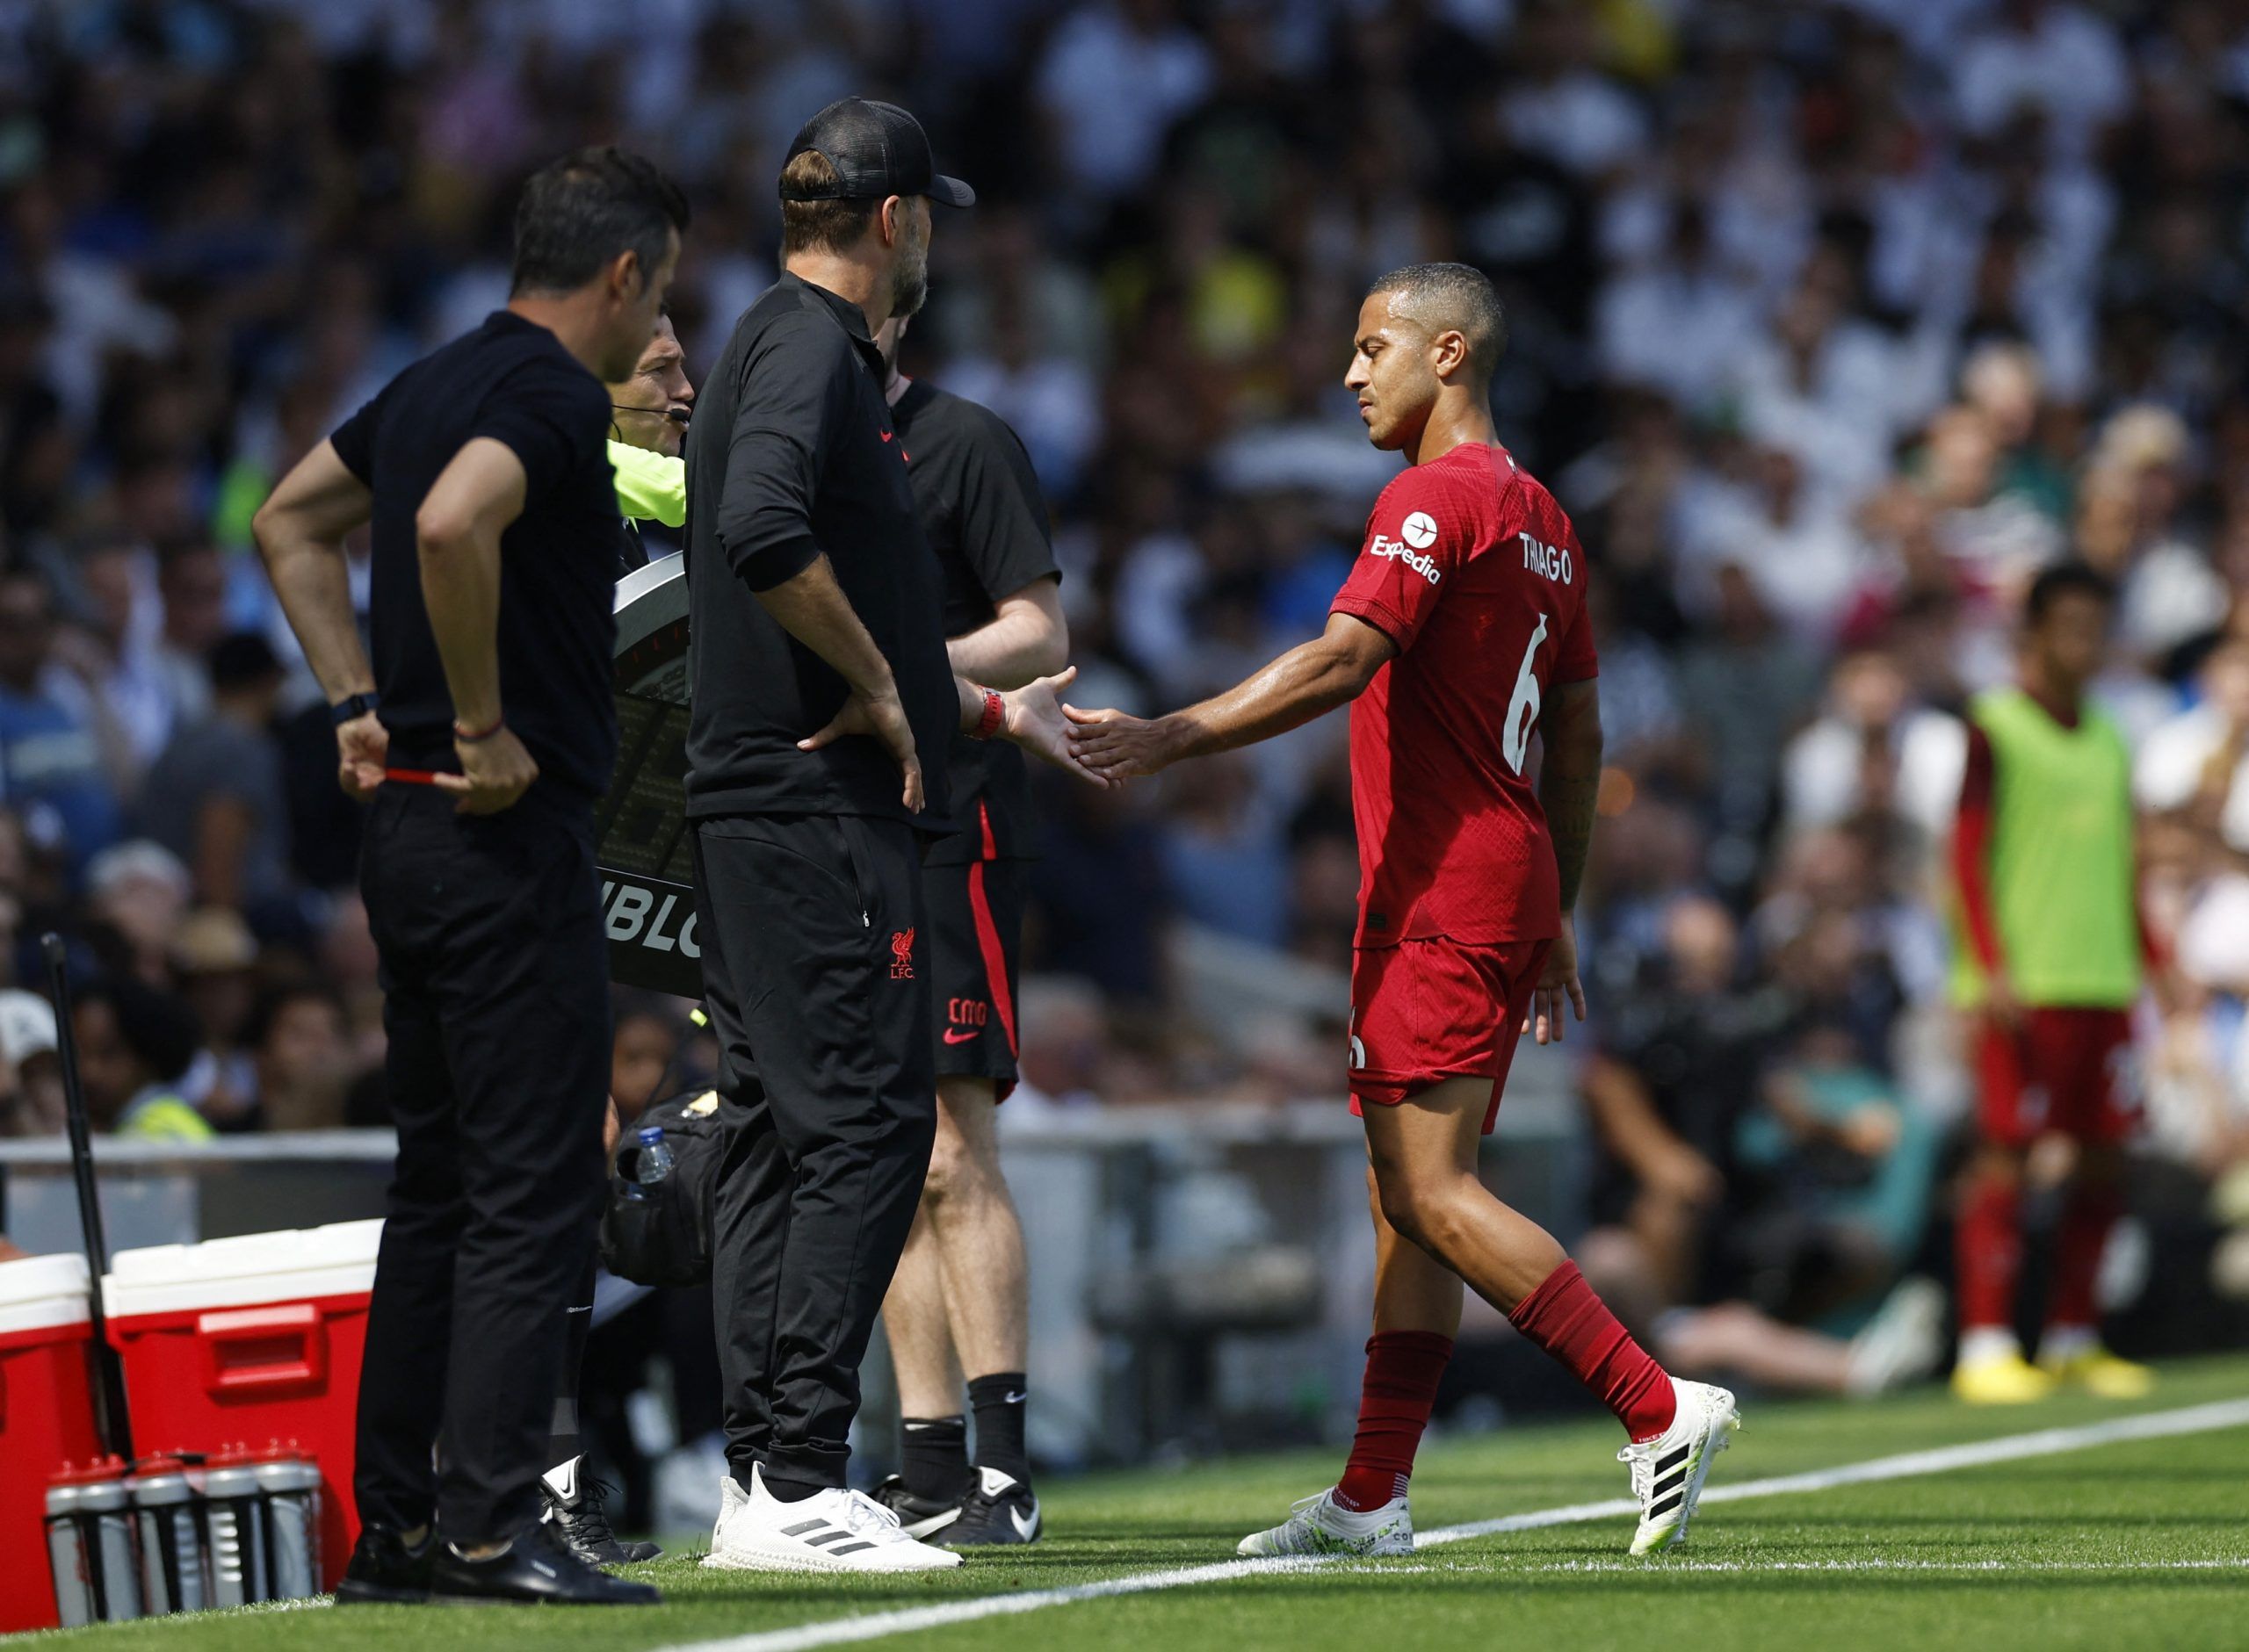 Soccer Football - Premier League - Fulham v Liverpool - Craven Cottage, London, Britain - August 6, 2022 Liverpool's Thiago Alcantara touches hands with manager Juergen Klopp as he is substituted off after sustaining an injury Action Images via Reuters/Peter Cziborra EDITORIAL USE ONLY. No use with unauthorized audio, video, data, fixture lists, club/league logos or 'live' services. Online in-match use limited to 75 images, no video emulation. No use in betting, games or single club /league/play